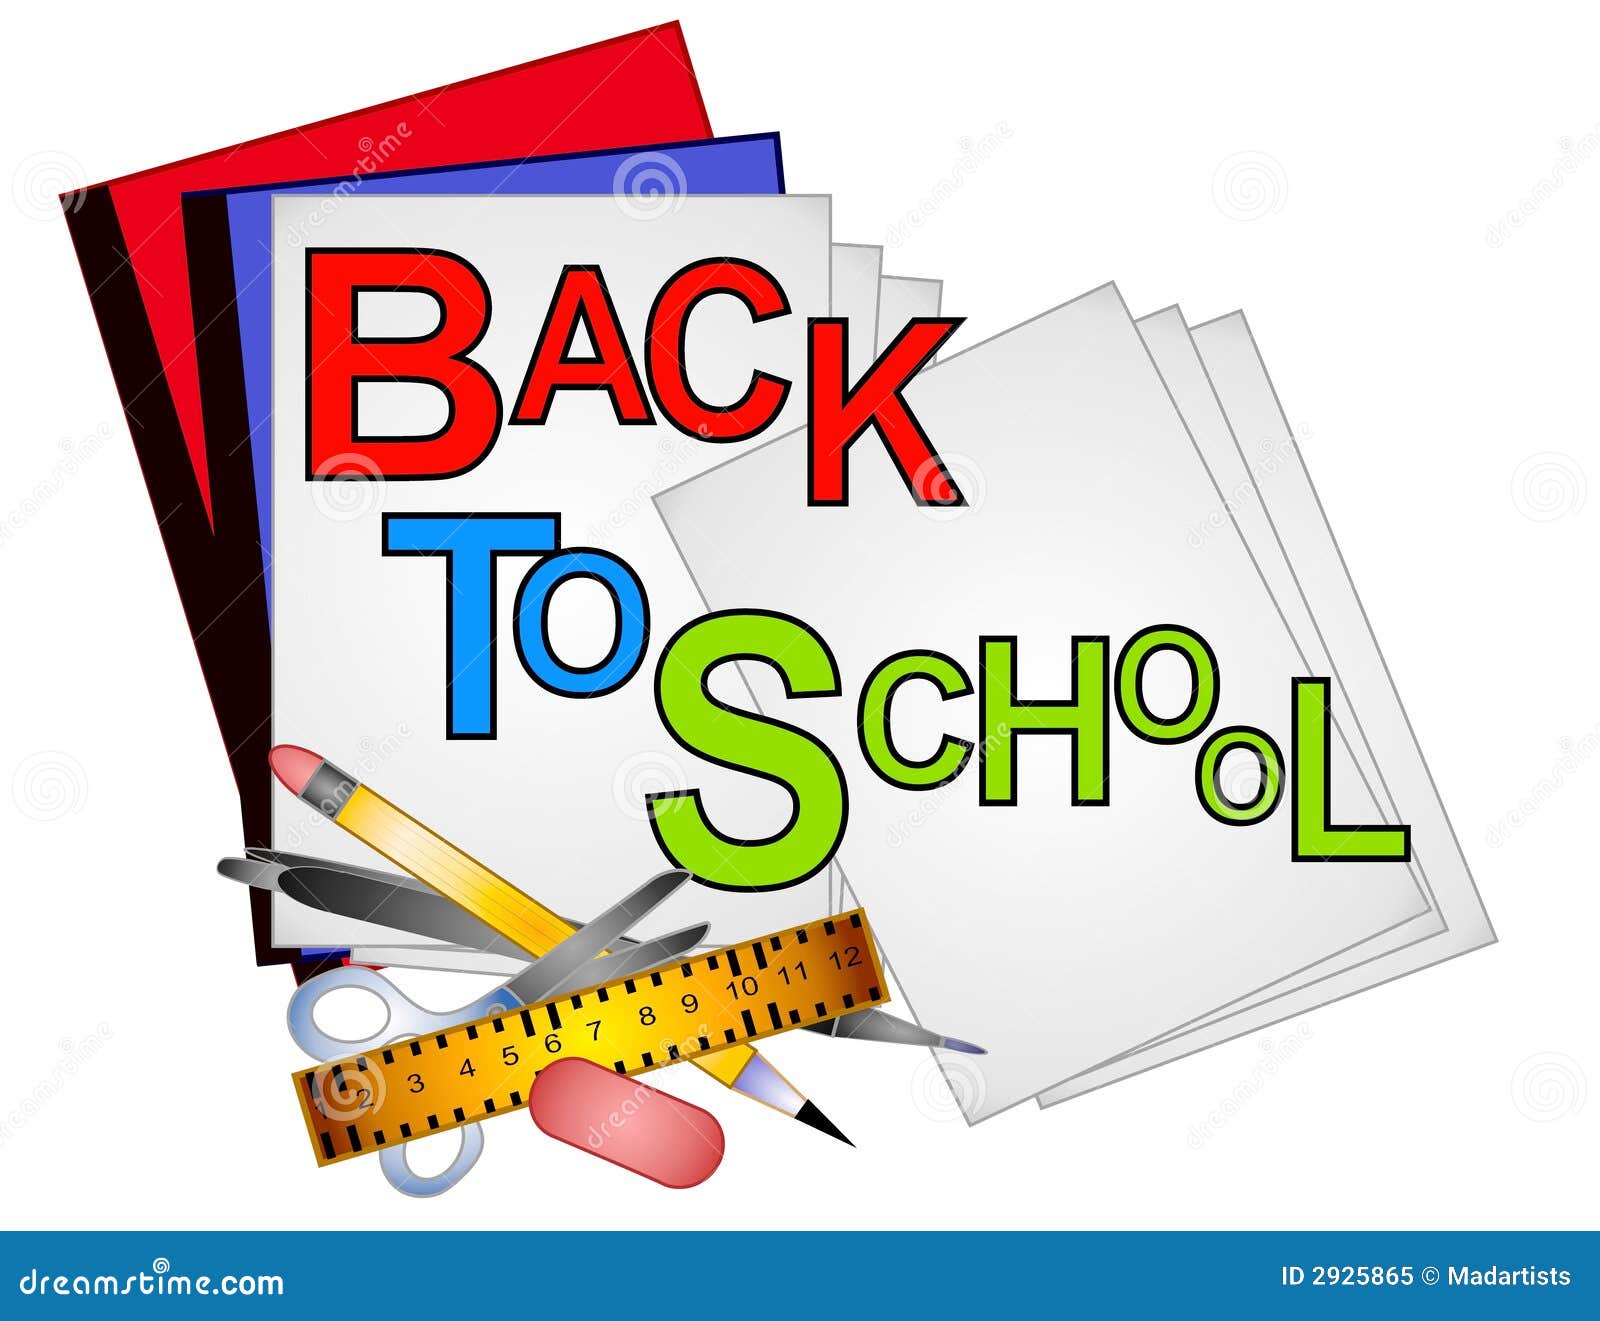 clipart of back to school supplies - photo #4